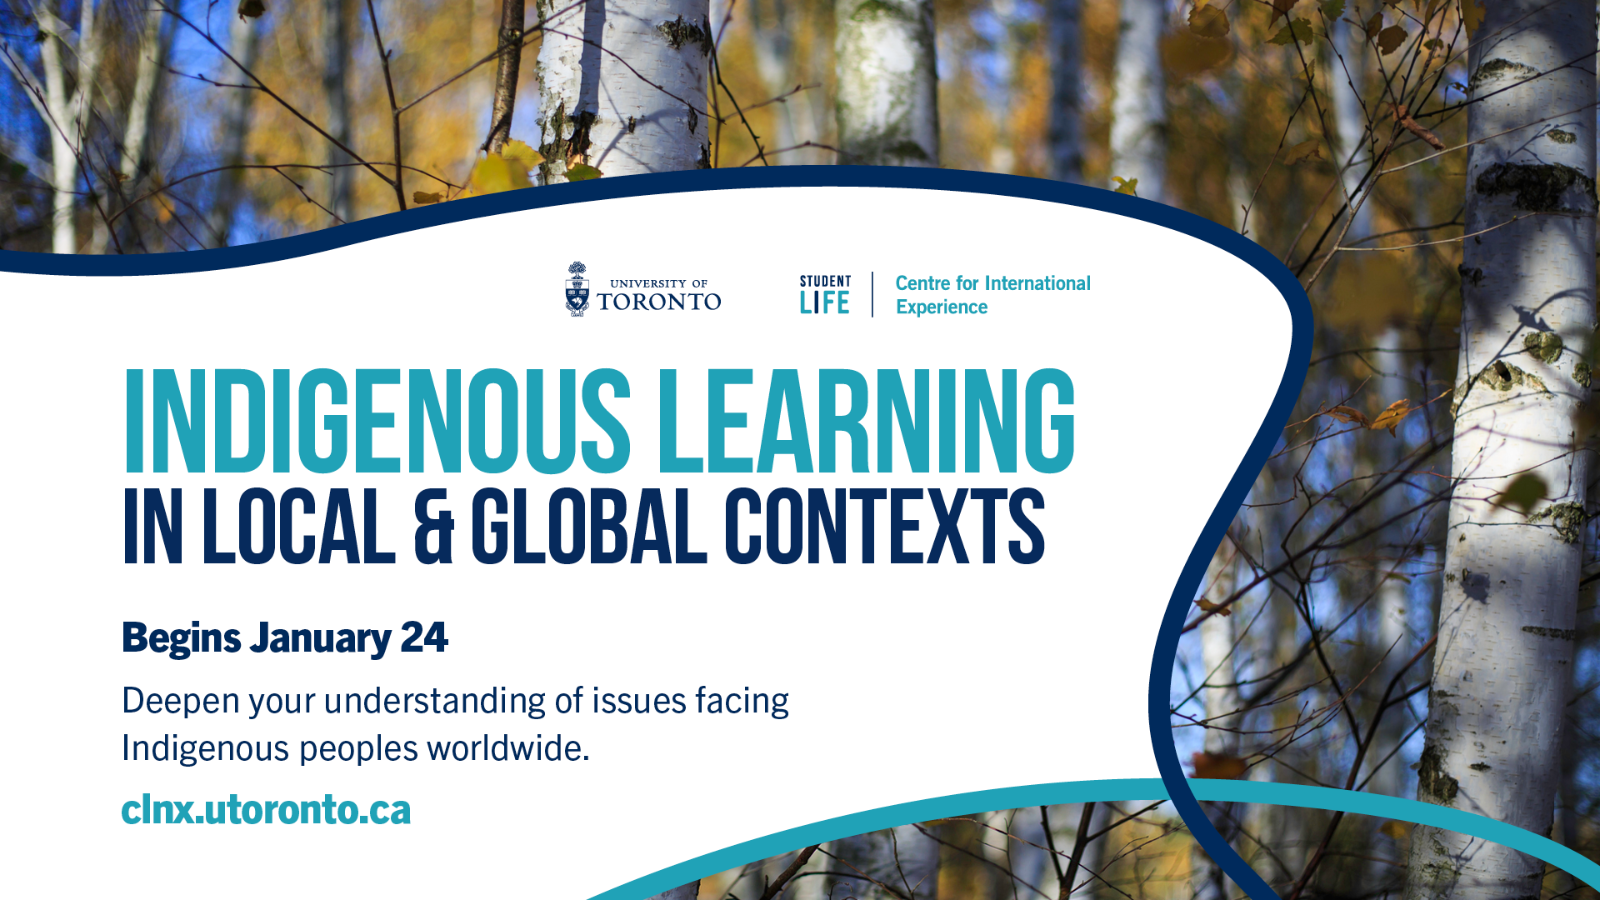 A photo of tree trucks with text, "Indigenous Learning in Local & Global Contexts. Begins January 24 Deepen your understanding of issues facing Indigenous peoples worldwide. clnx.utoronto.ca" 